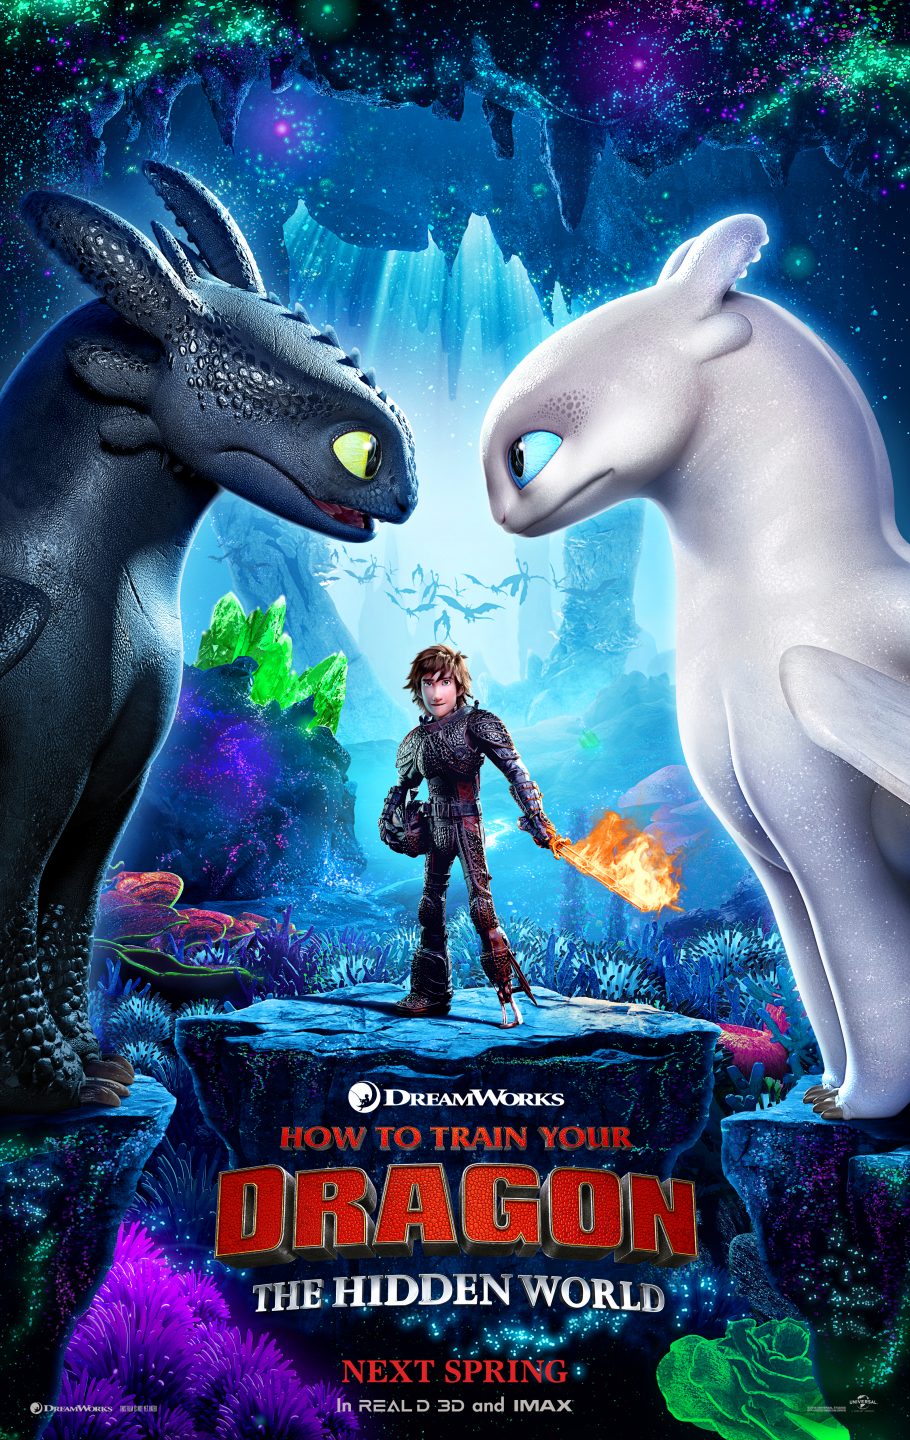 How To Train Your Dragon: The Hidden World poster (Universal Pictures/DreamWorks Animation)